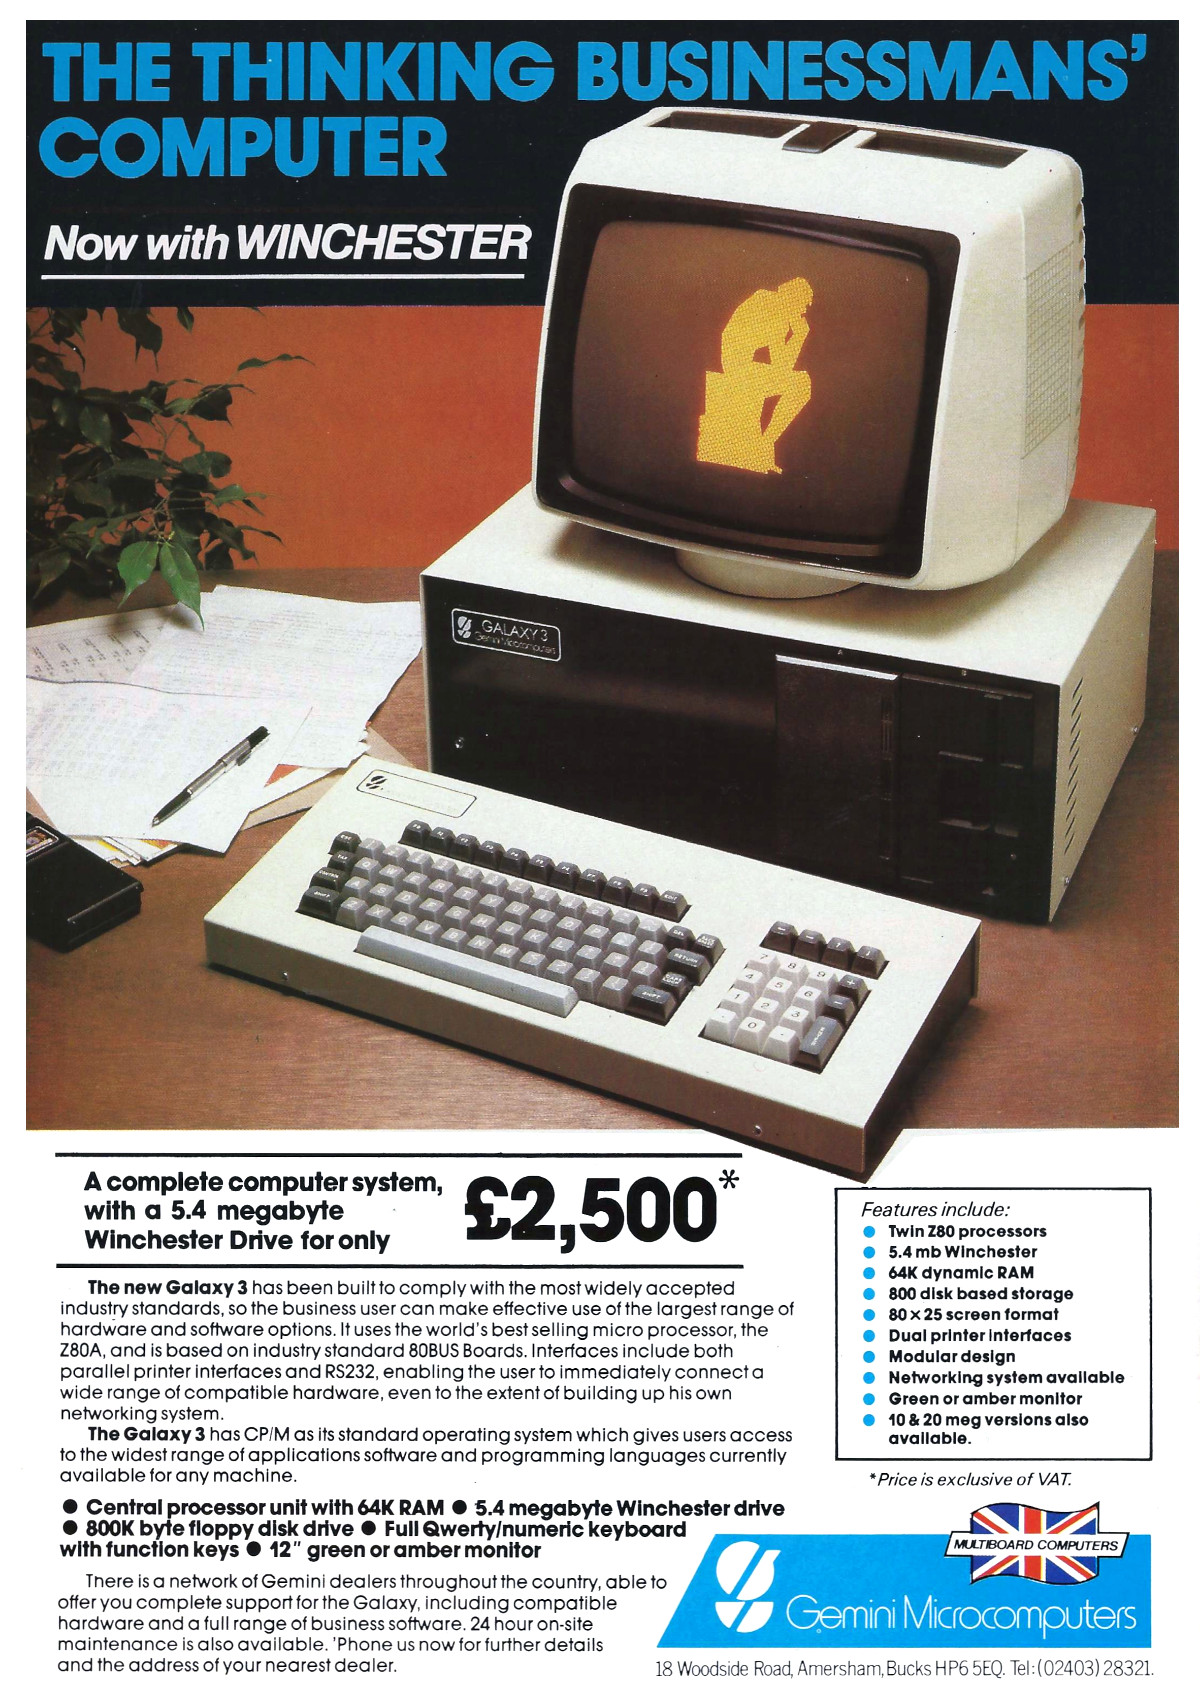 Also available was the Galaxy 3 - with a 5.4Mb Winchester for £2,500 - about £9,900 in 2024